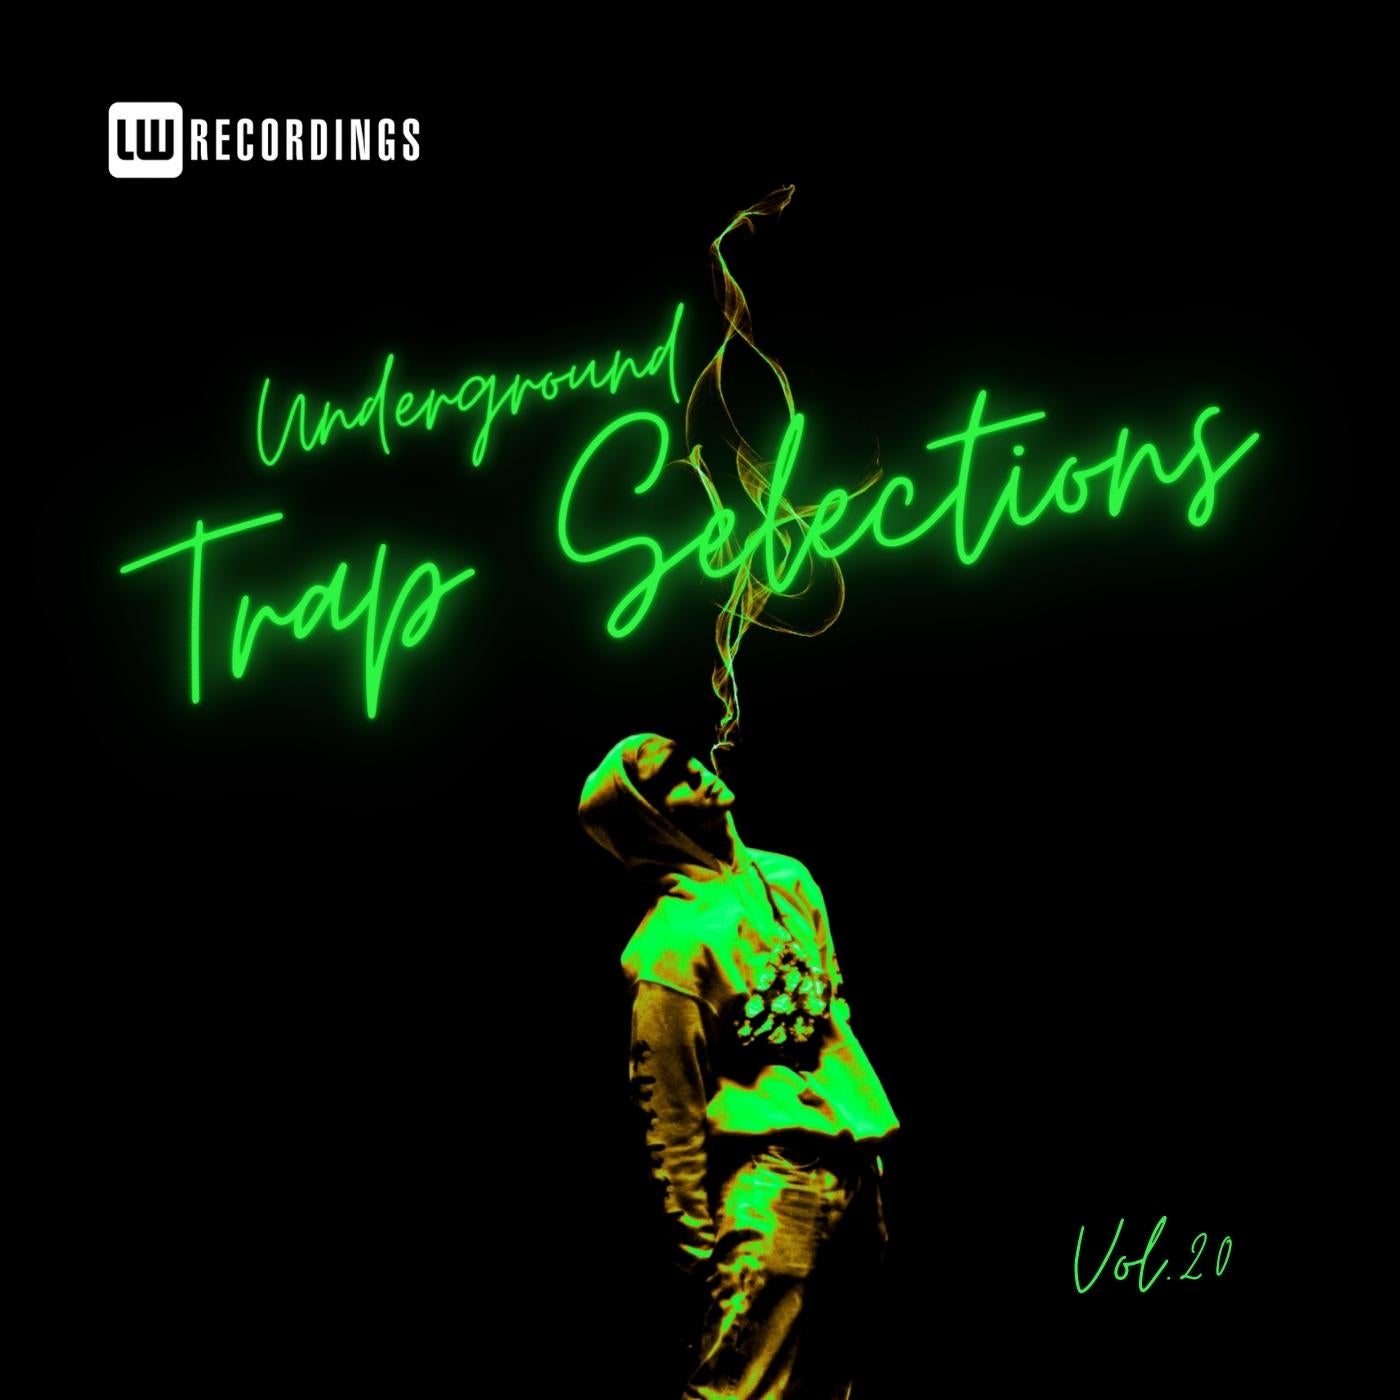 Underground Trap Selections, Vol. 20